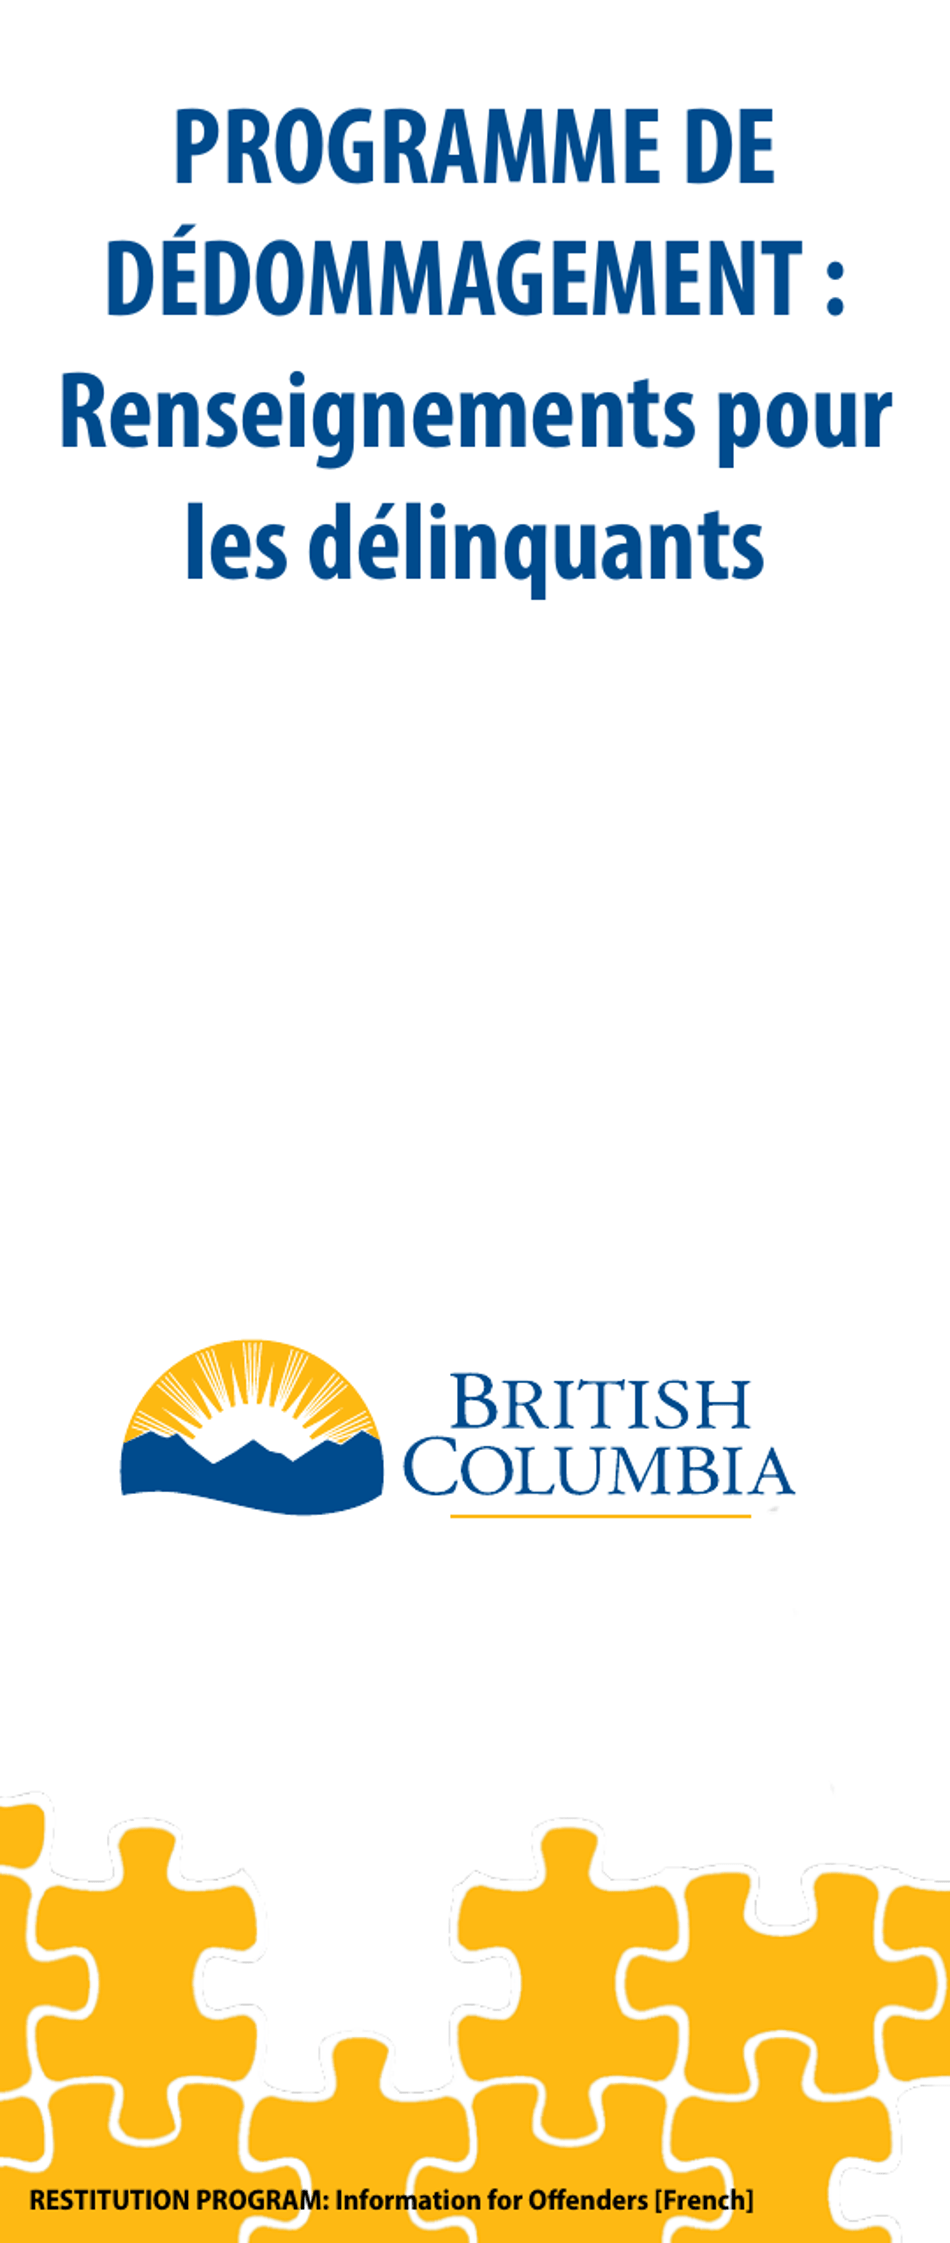 Restitution Program Application Form for Offenders - British Columbia, Canada (English / French), Page 1